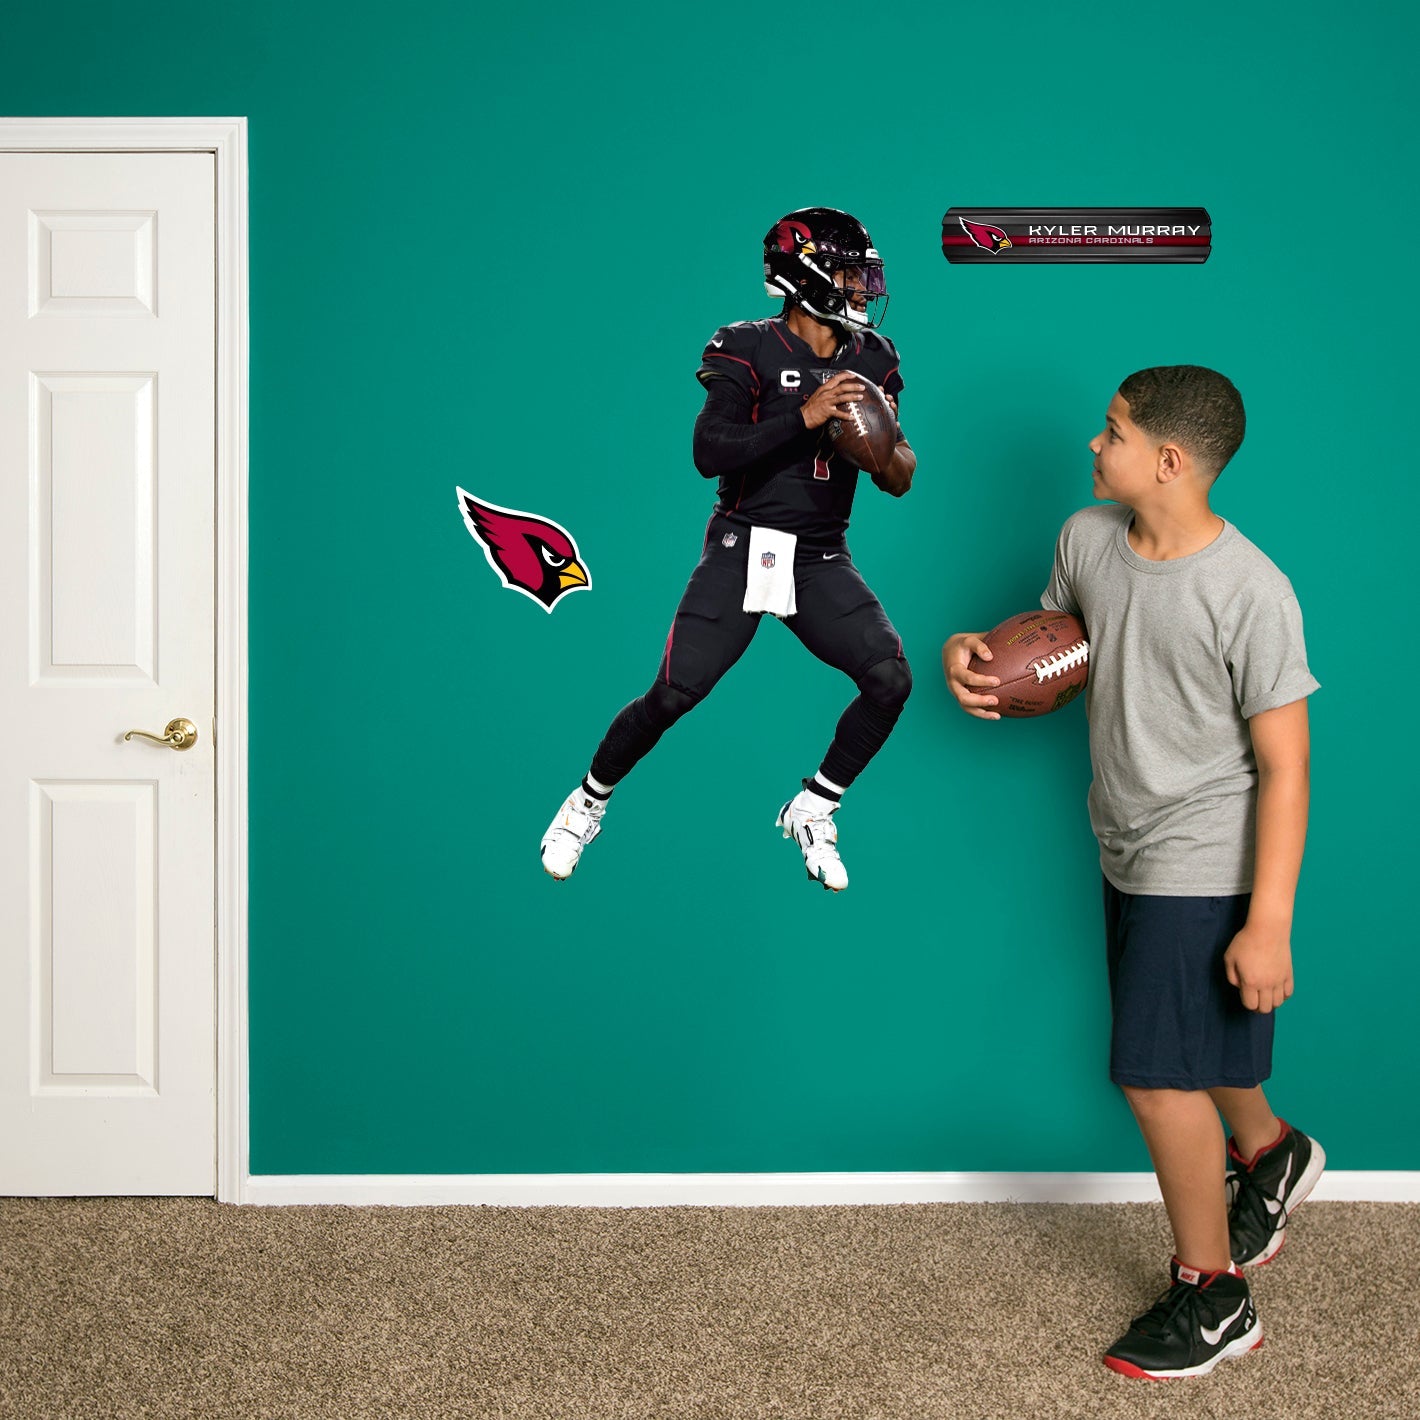 Arizona Cardinals: Kyler Murray Black Uniform - Officially Licensed NFL Removable Adhesive Decal